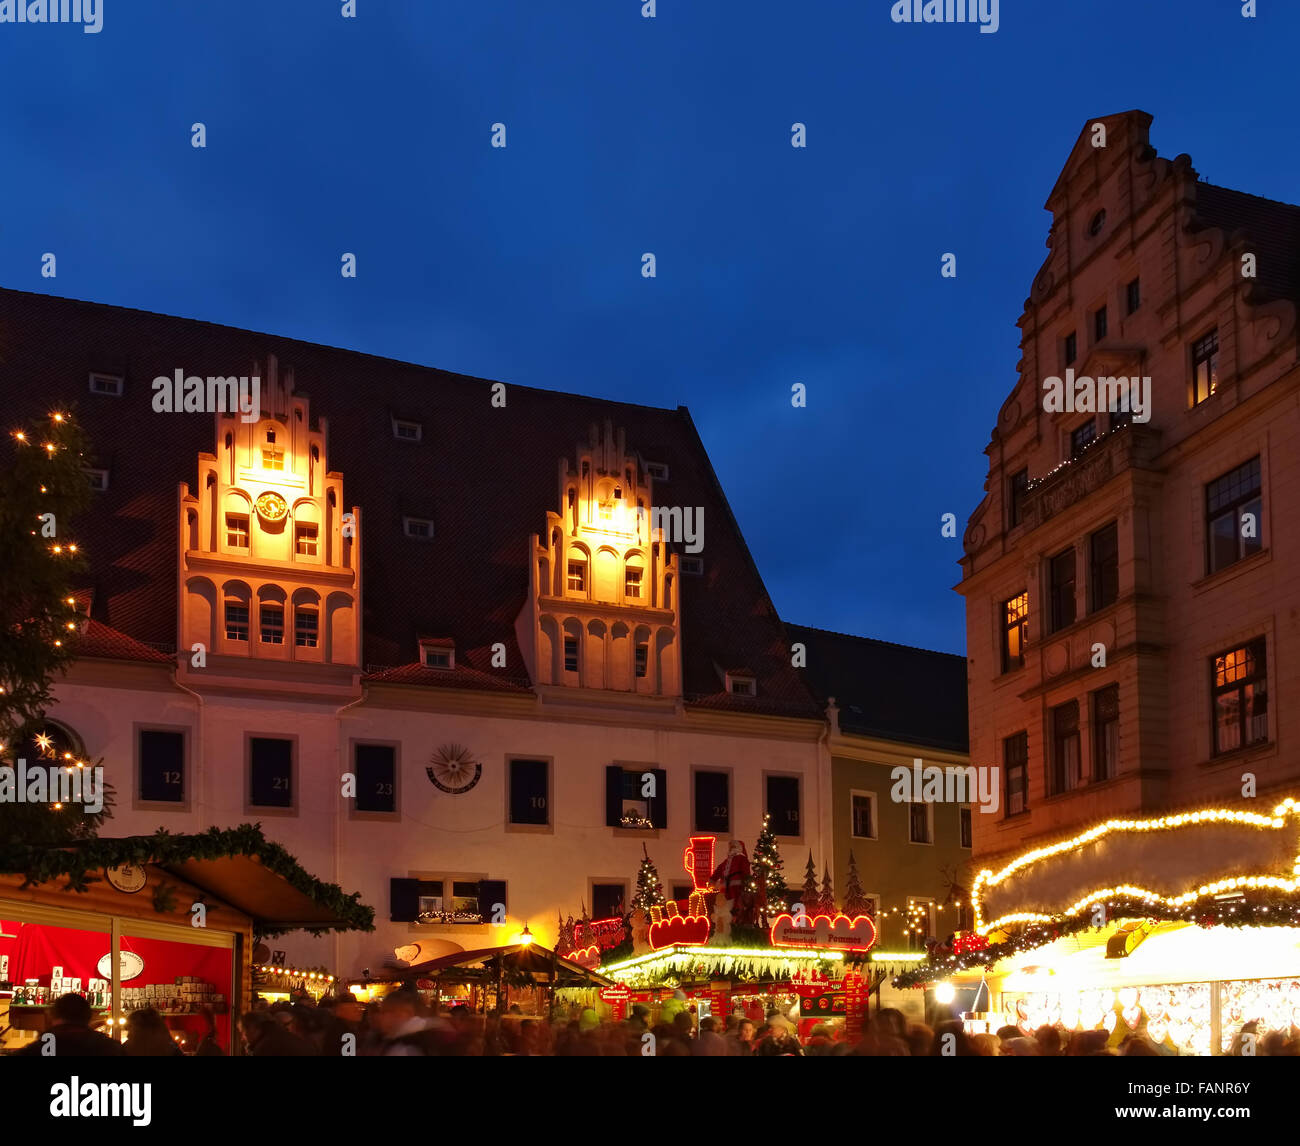 Rathaus Meißen High Resolution Stock Photography and Images - Alamy